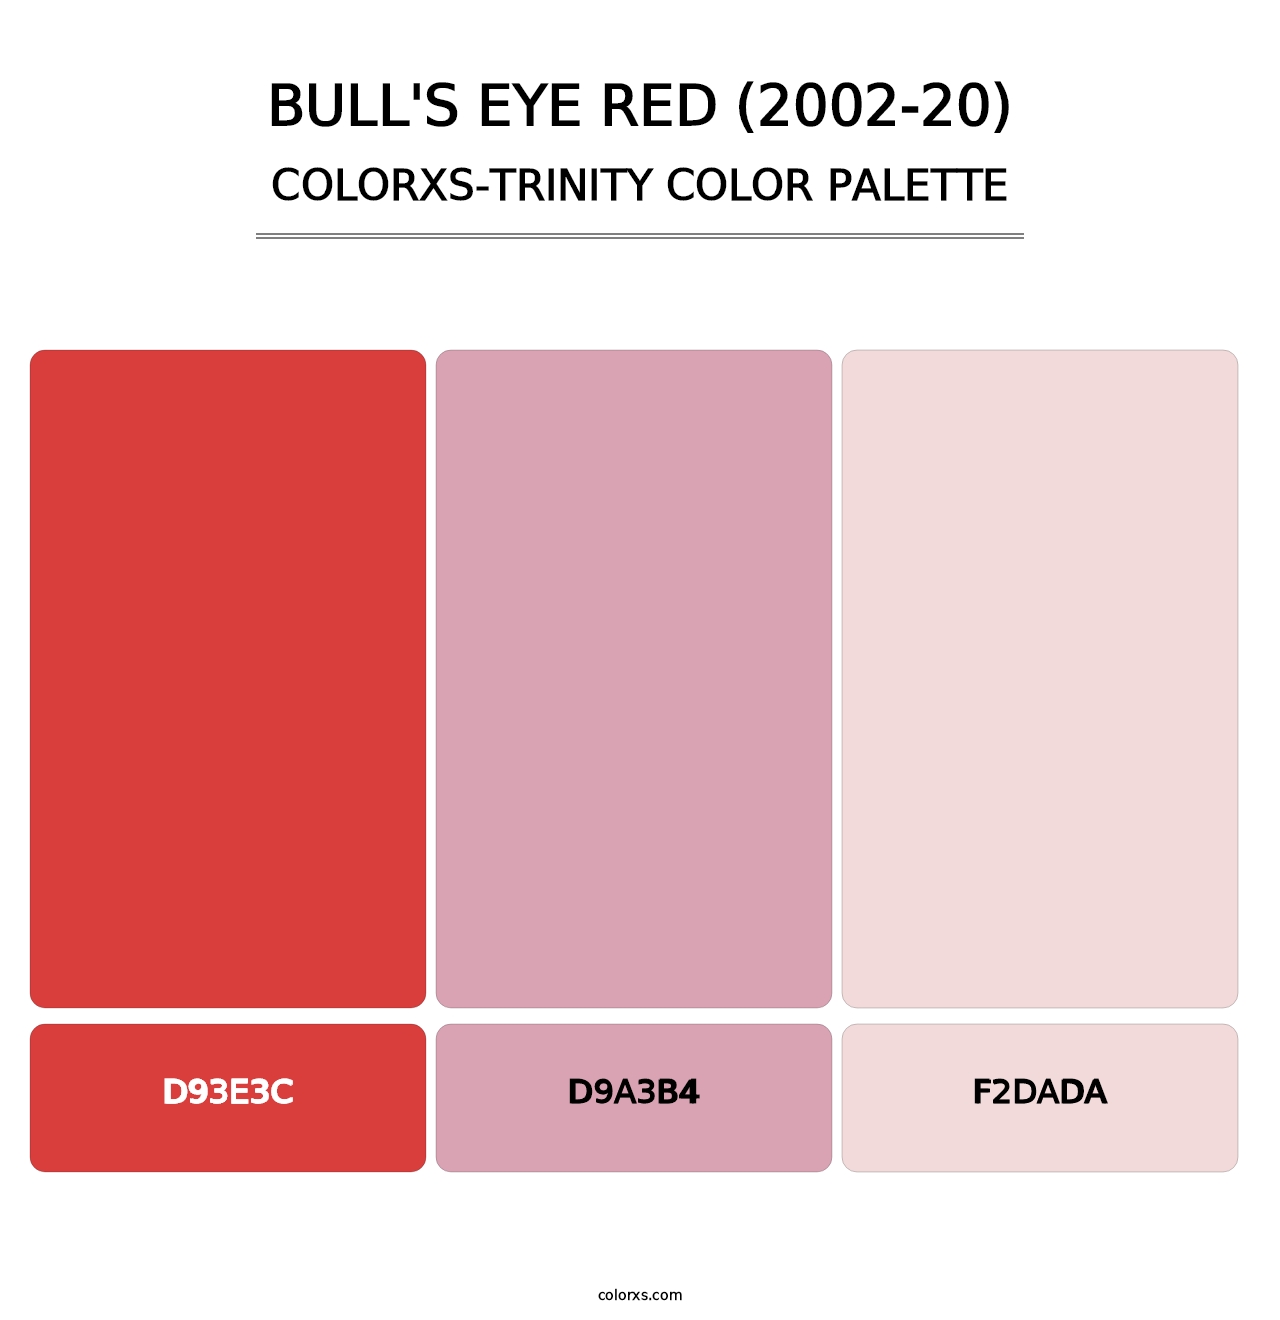 Bull's Eye Red (2002-20) - Colorxs Trinity Palette